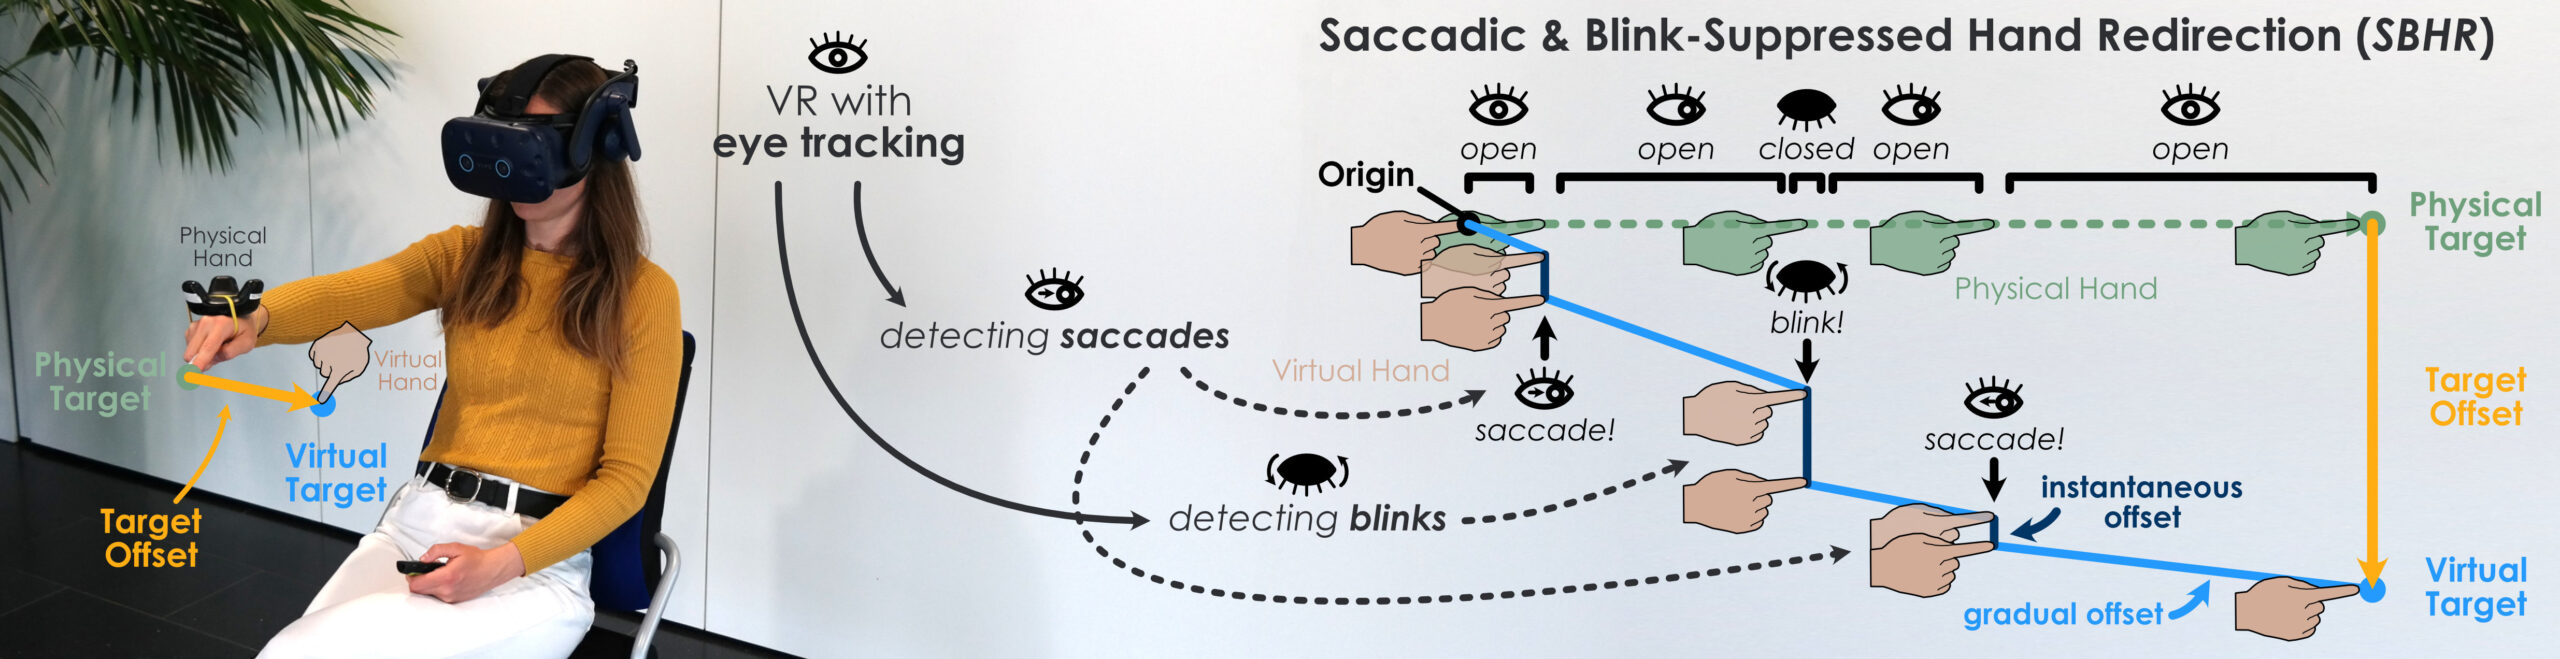 Beyond the Blink: Investigating Combined Saccadic & Blink-Suppressed Hand Redirection in Virtual Reality